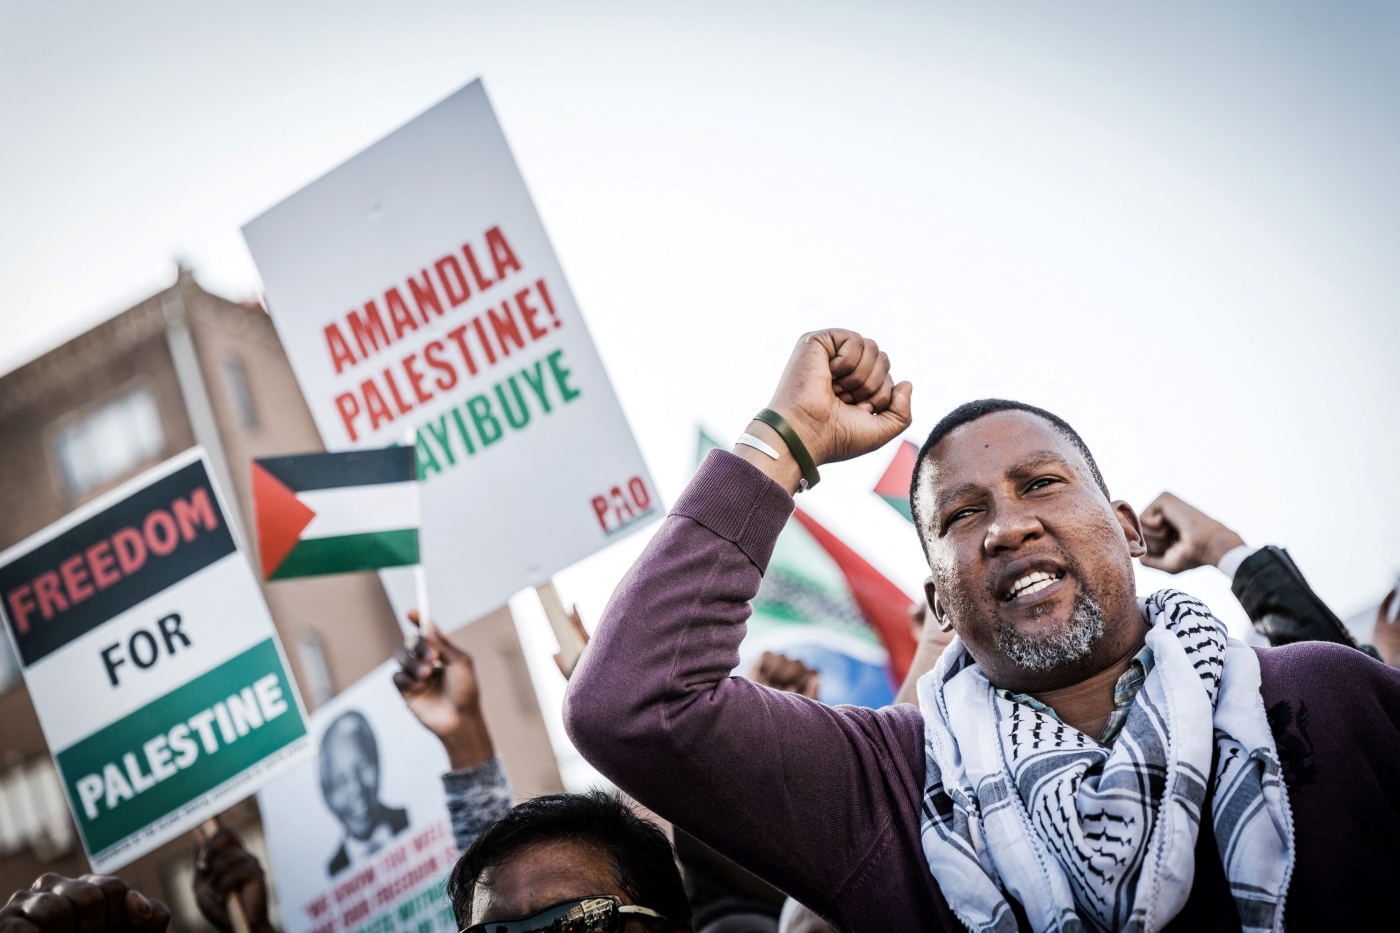 Former South African President Nelson Mandela's grandson, Chief Mandla Mandela joins hundreds of demonstrators at an inter-denominational march of members of pro-Palestinian groups and other civil society organisations during the holy month of Ramadan in Durban on June 2, 2018 (AFP)